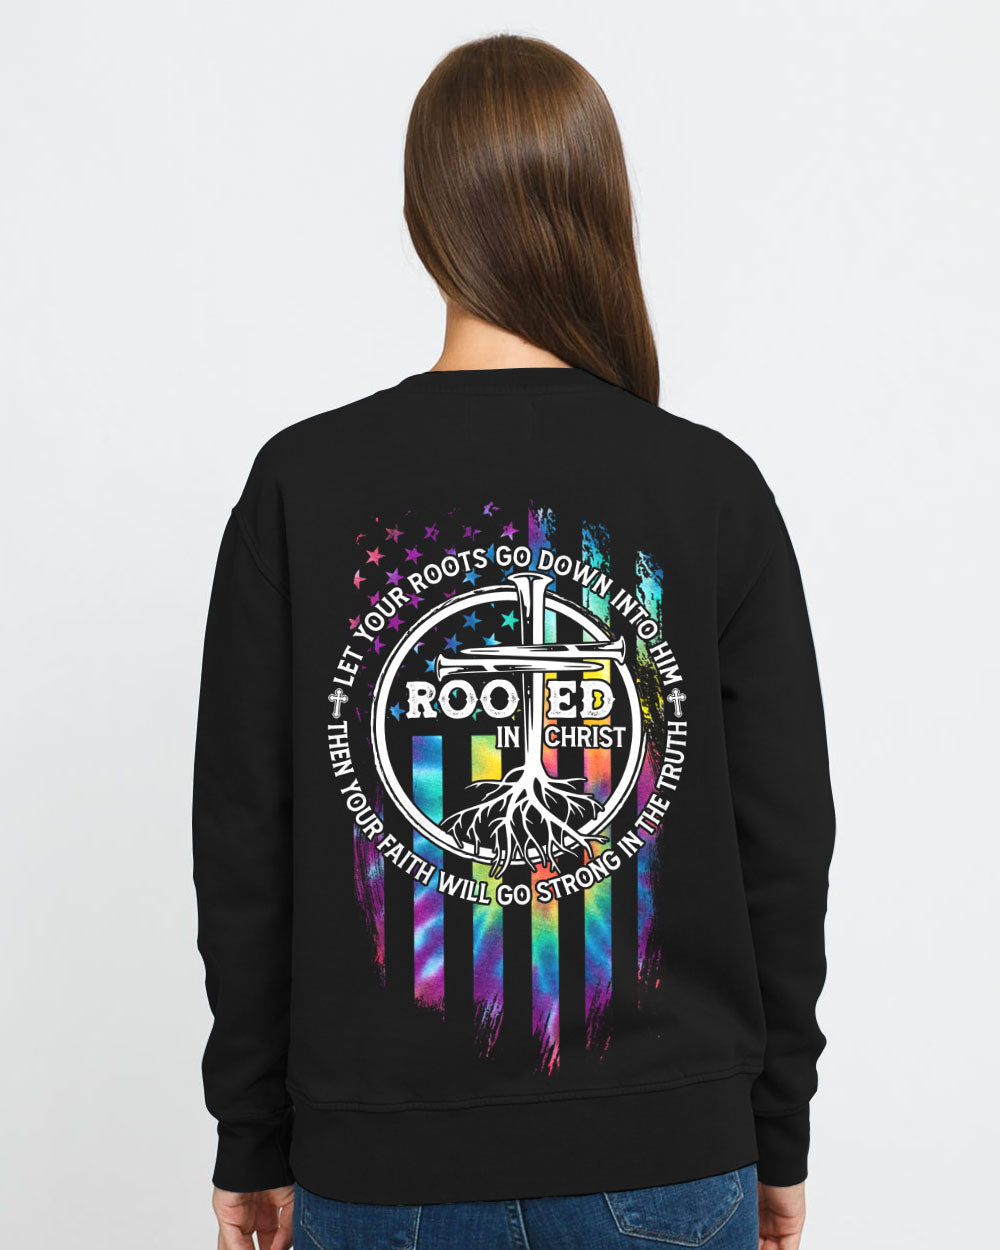 Let Your Roots Go Down Into Him Women's Christian Sweatshirt